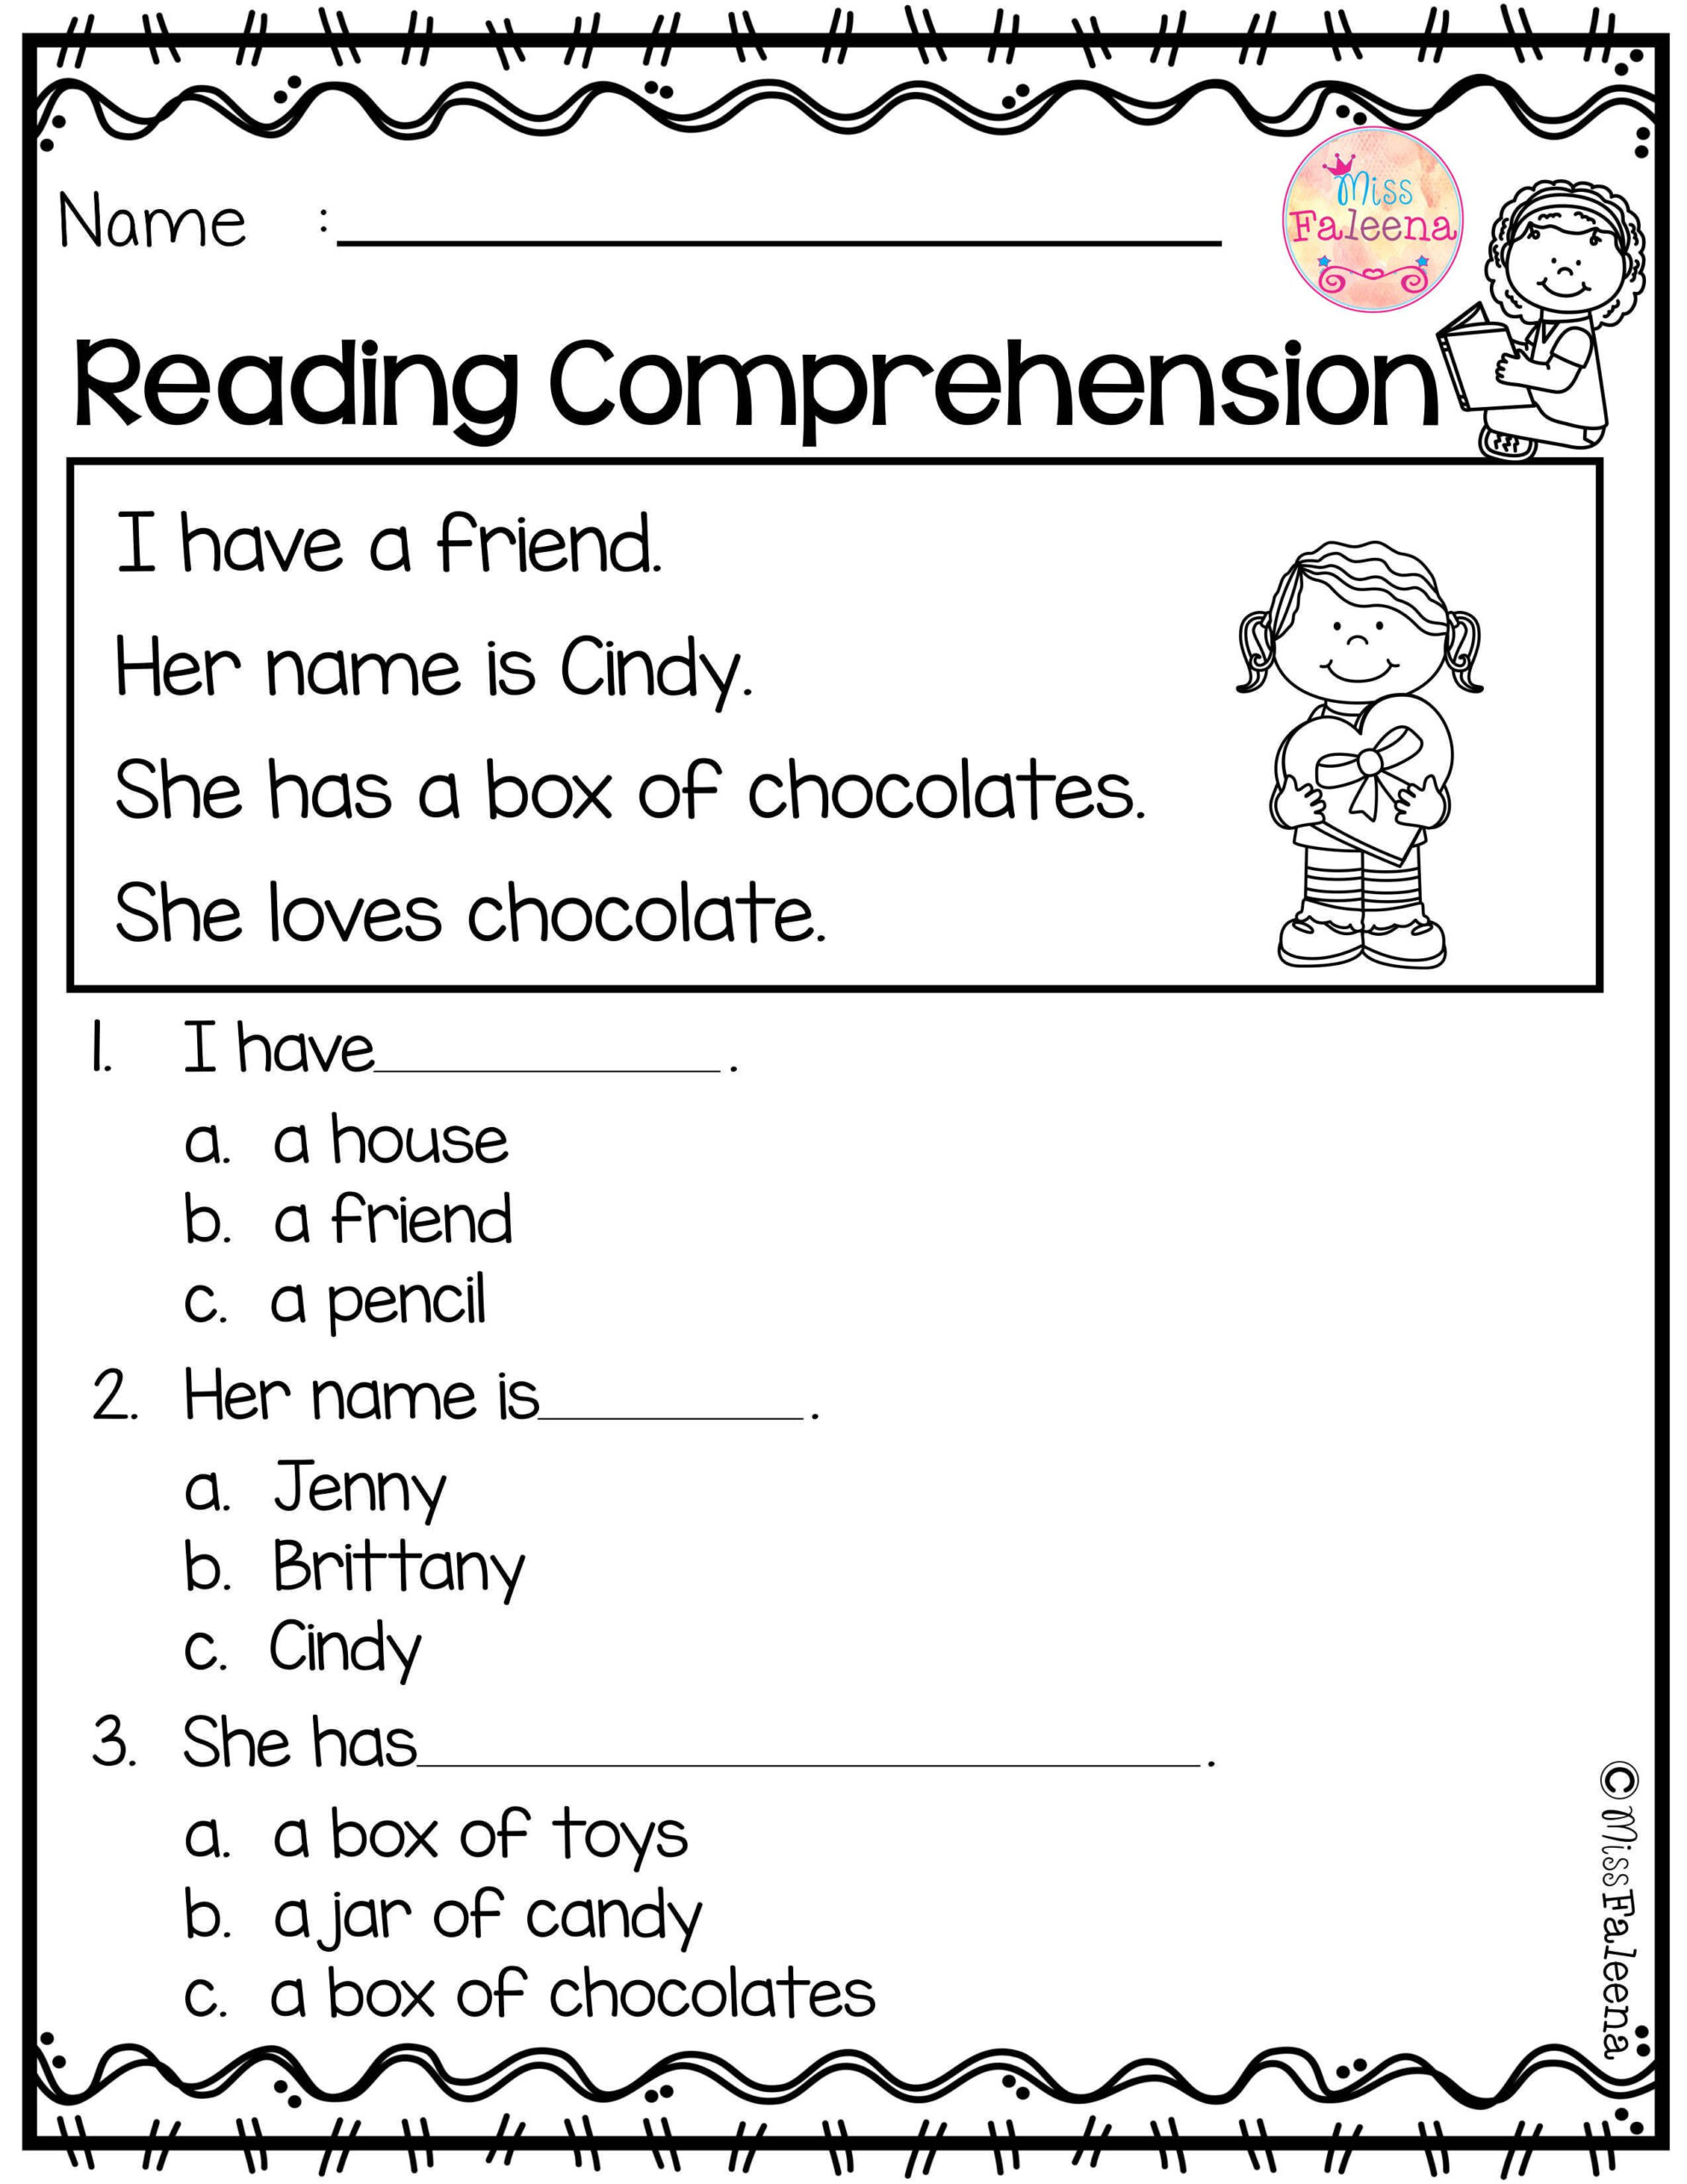 February Reading Comprehension Is Suitable For Kindergarten Students Or 